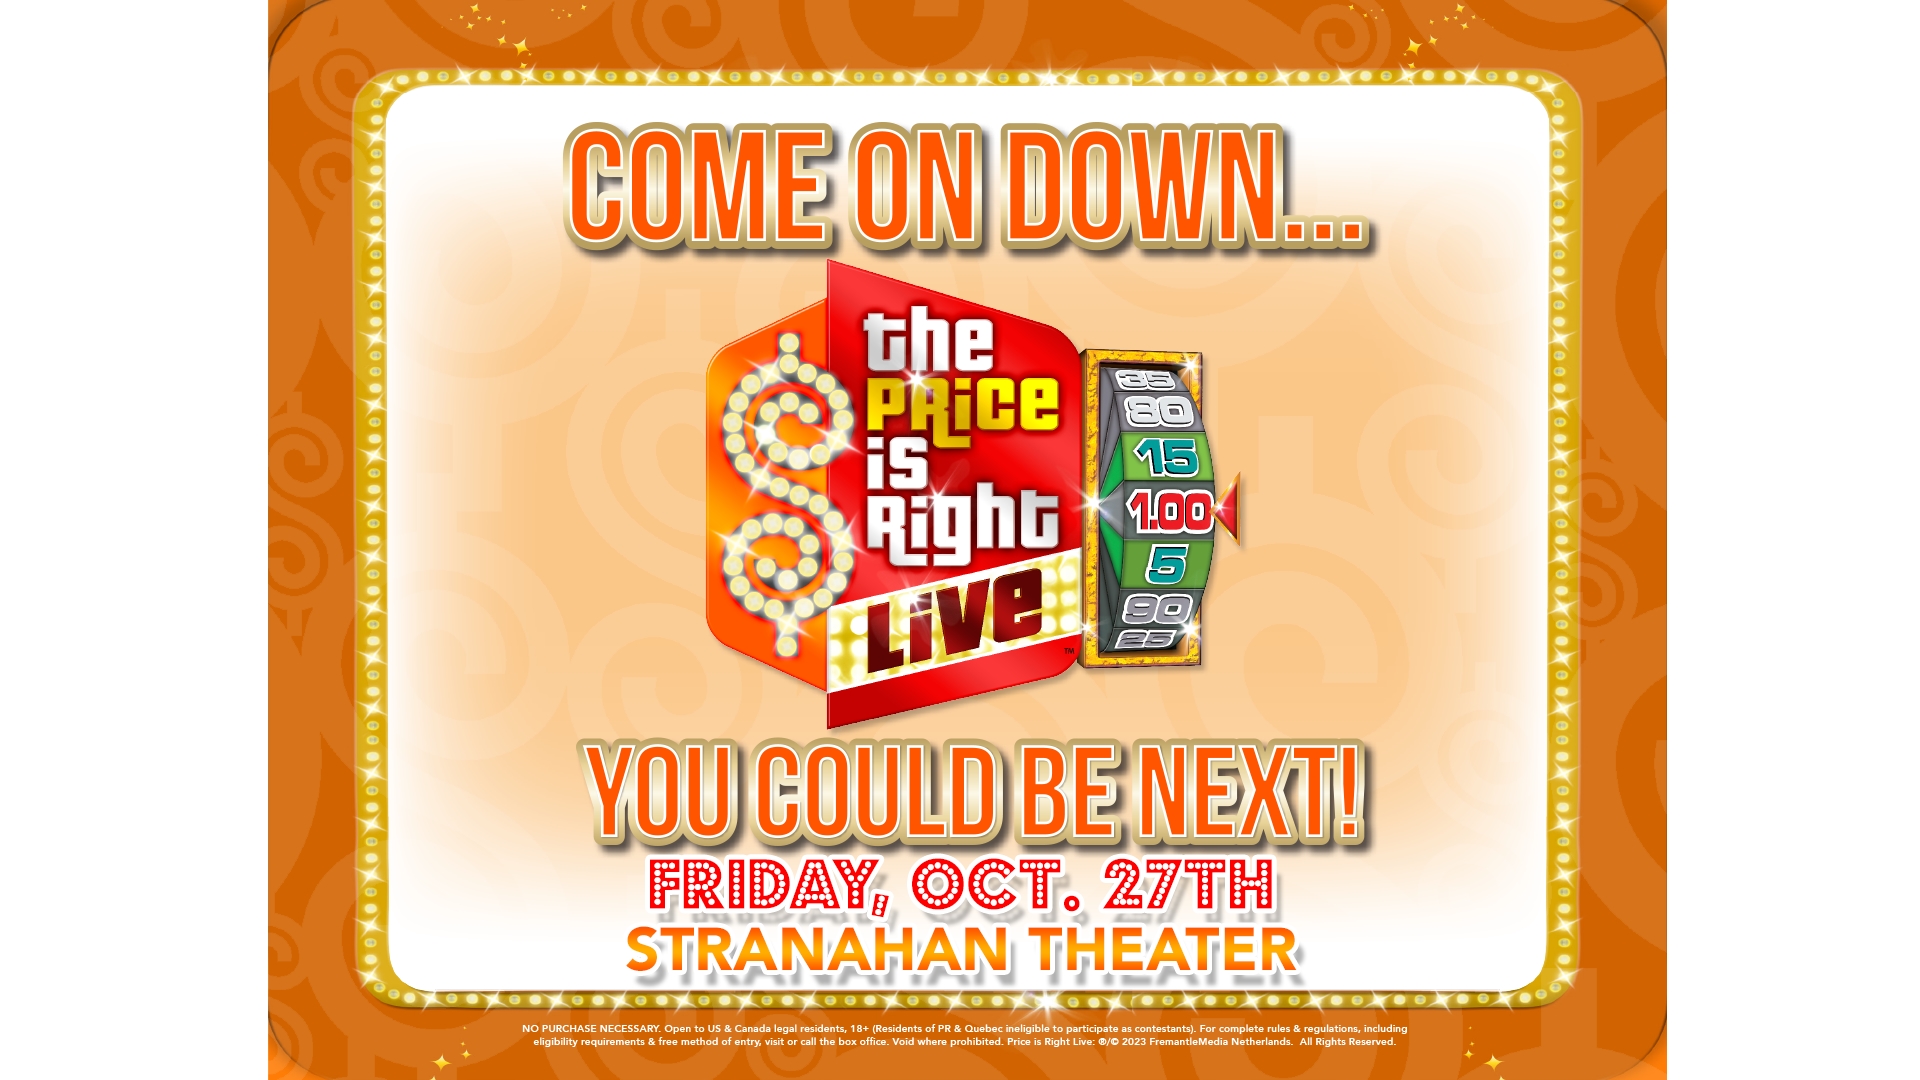 Come on Down! Enter to win tickets to the Price is Right LIVE